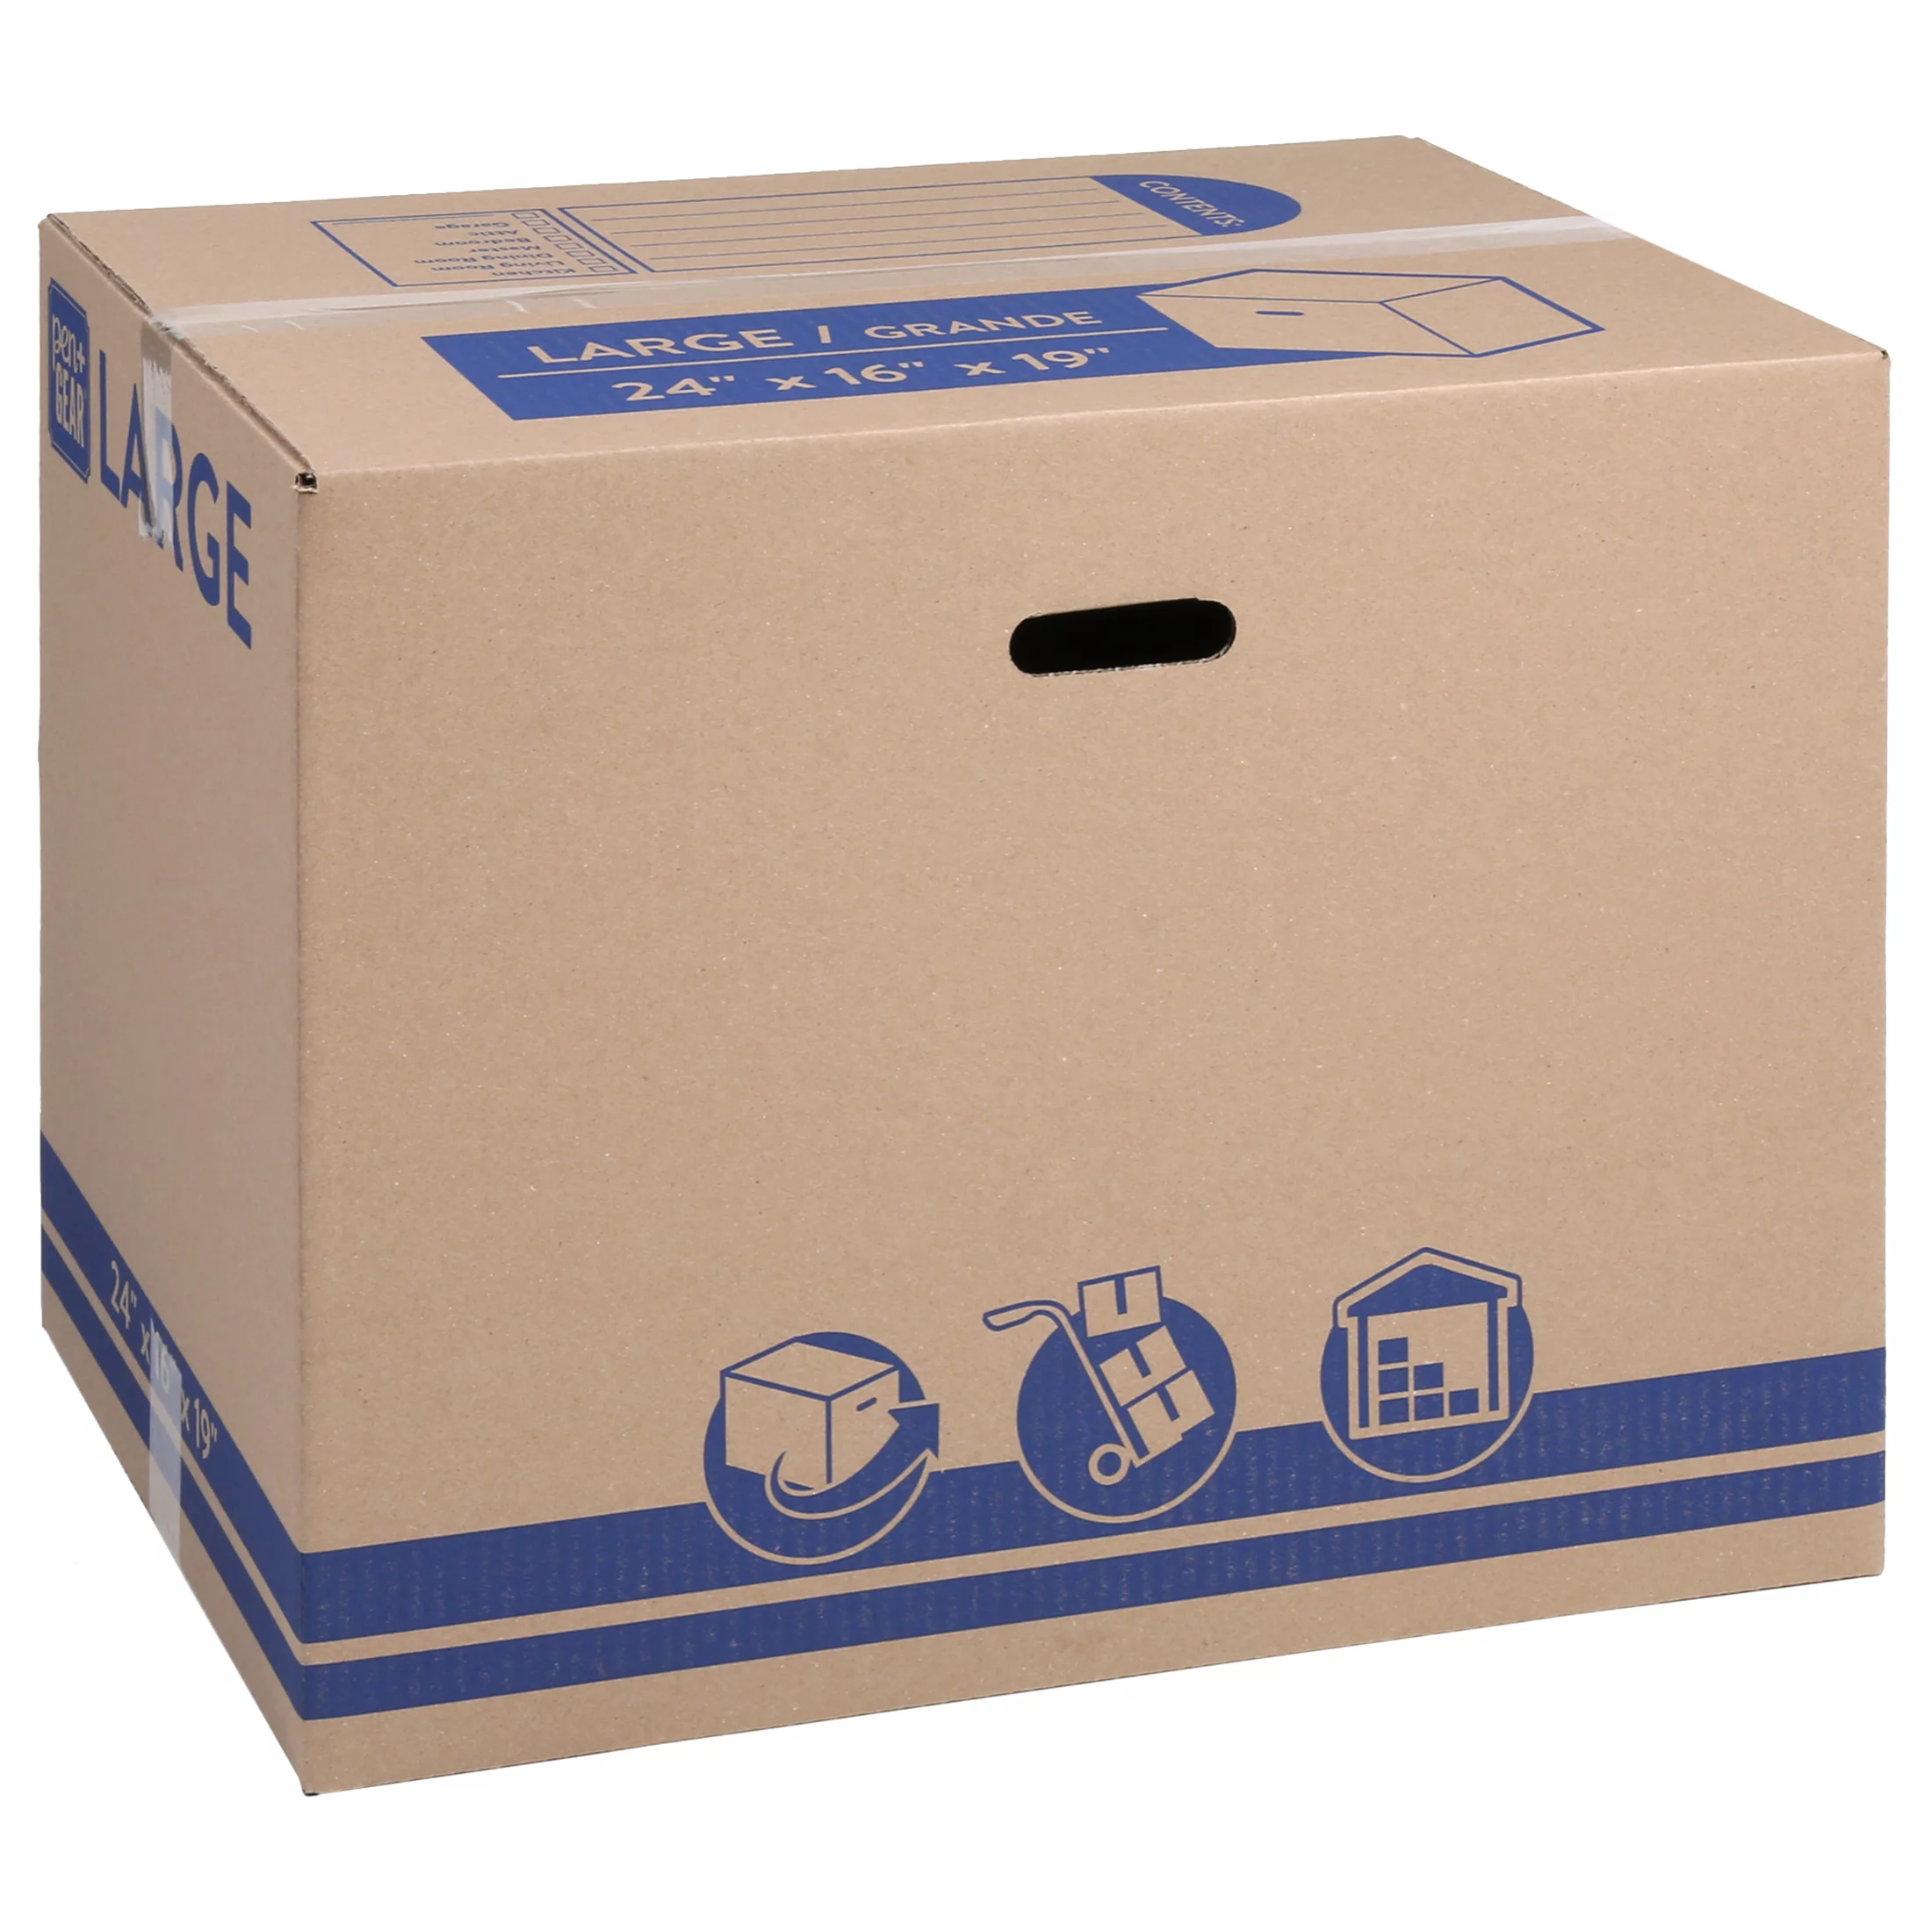 Pen+Gear Large Recycled Moving Boxes, 24L x 16W x 19H, Kraft